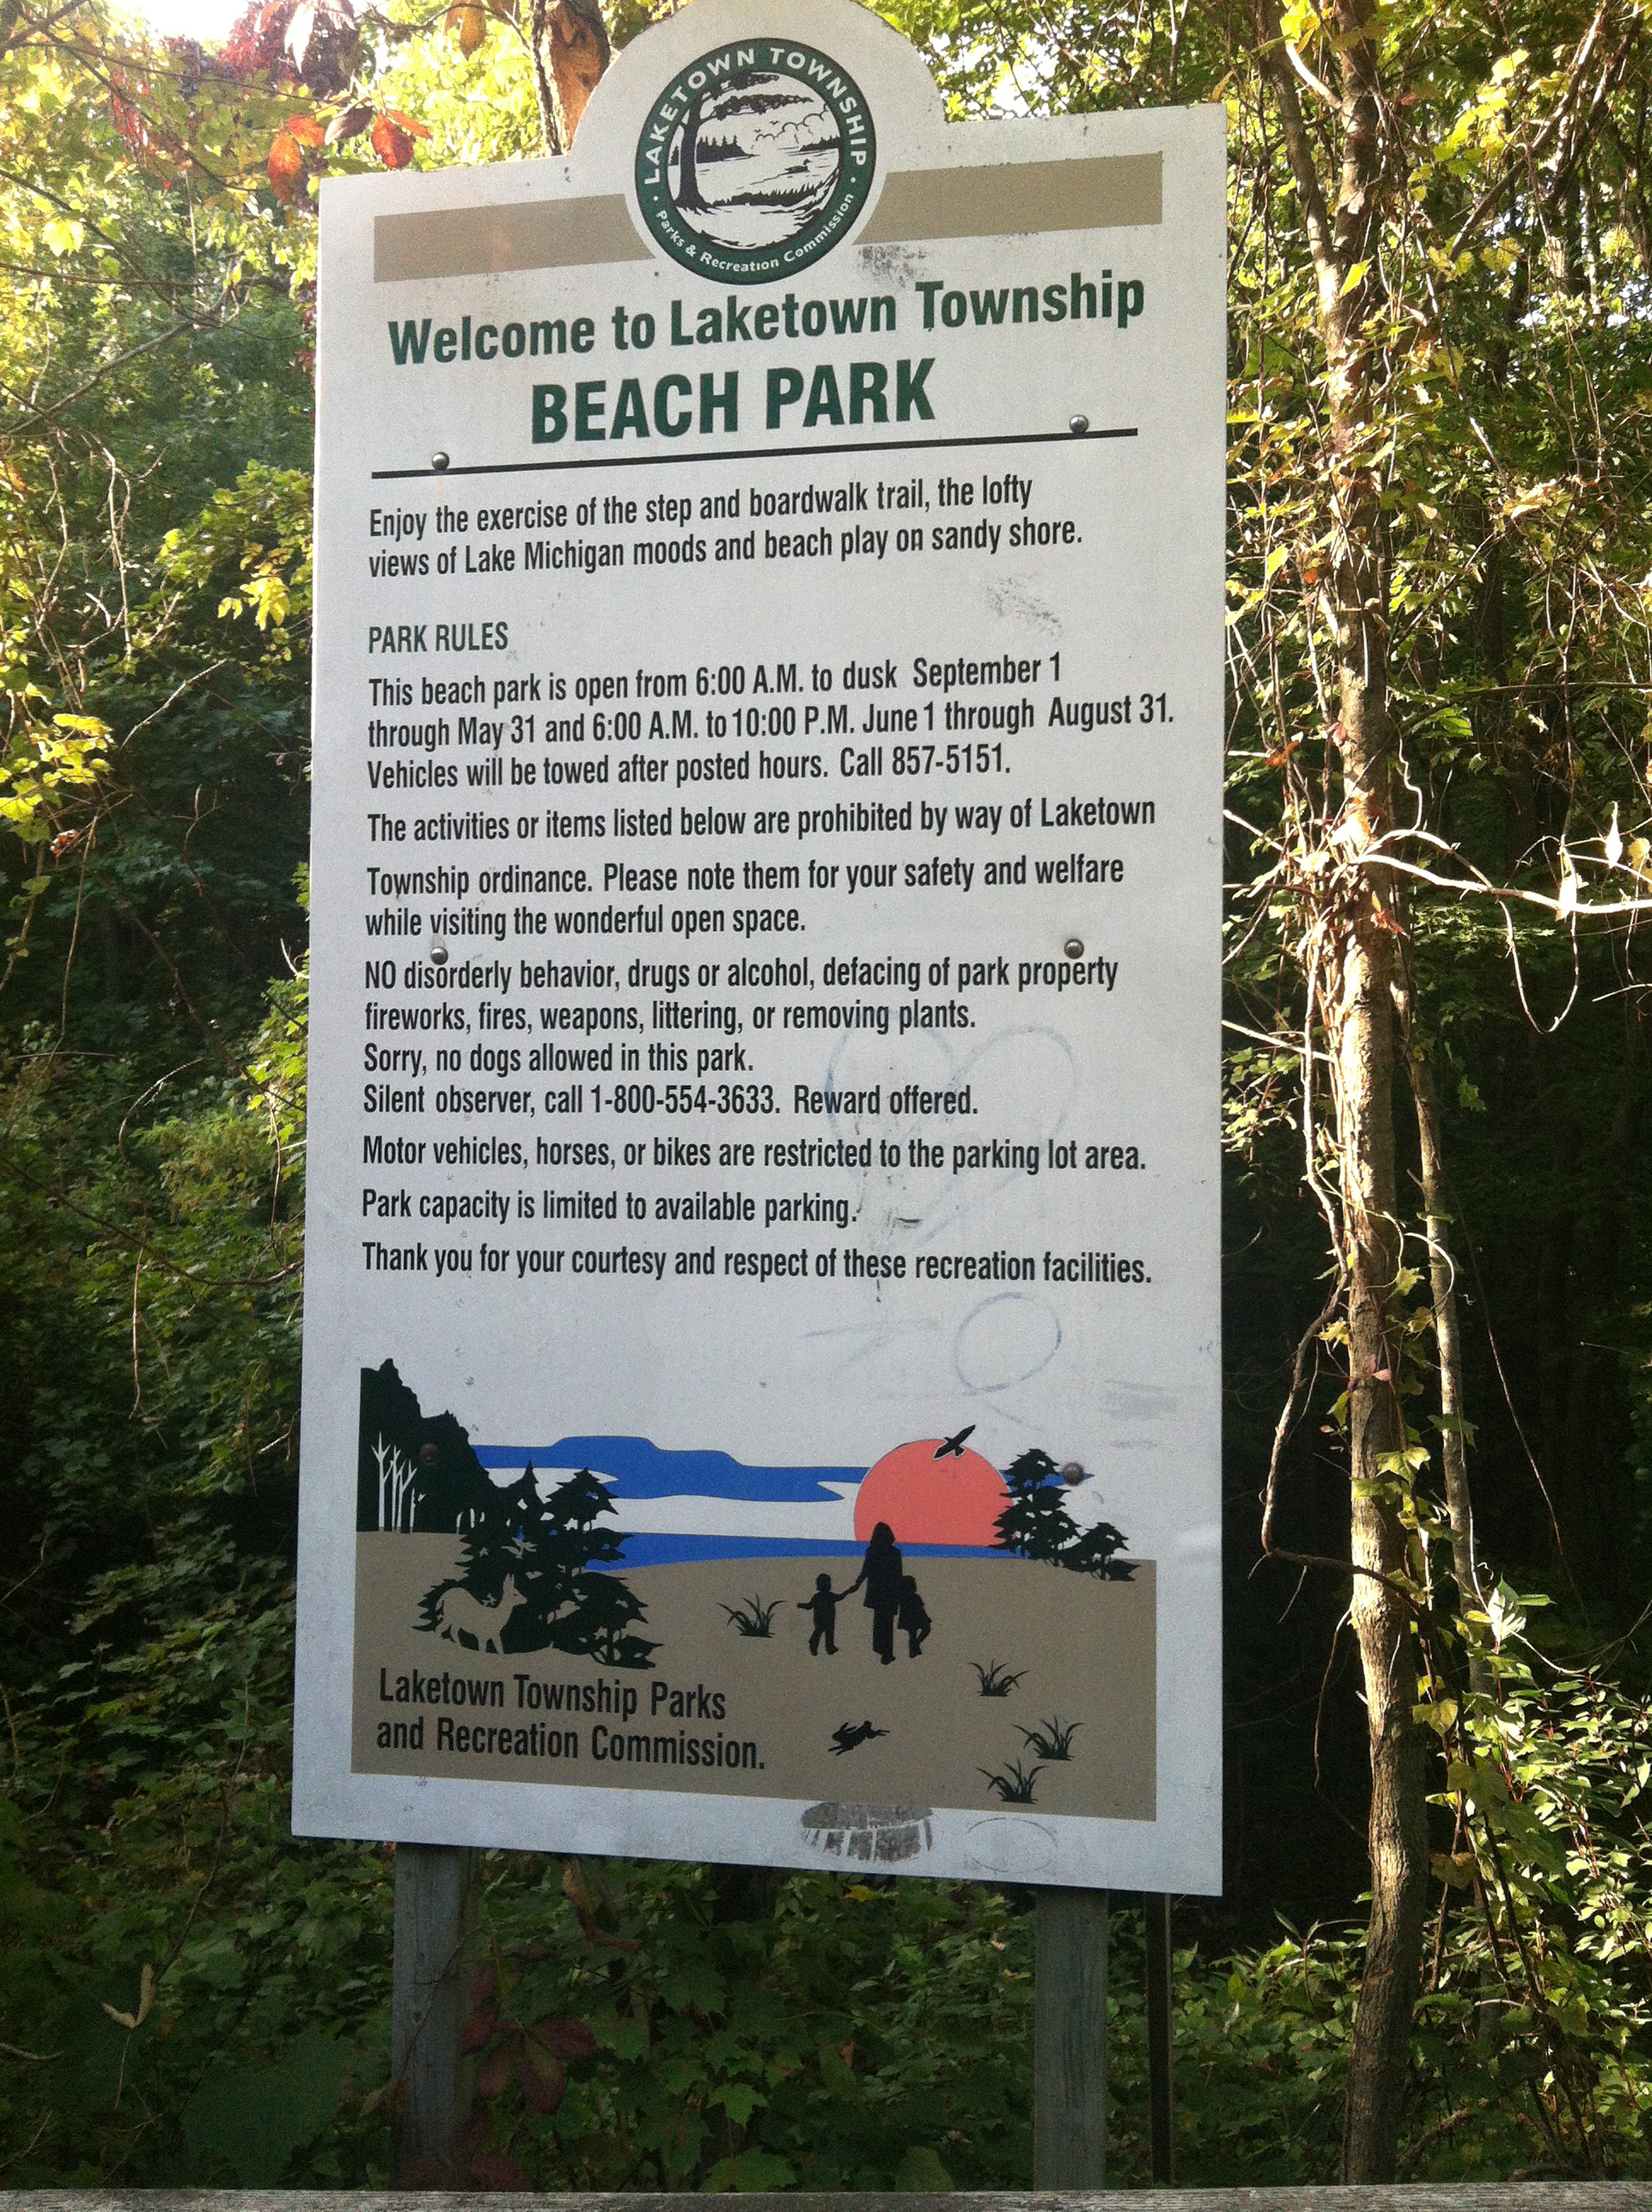 The sign welcoming us to Laketown Beach Park :